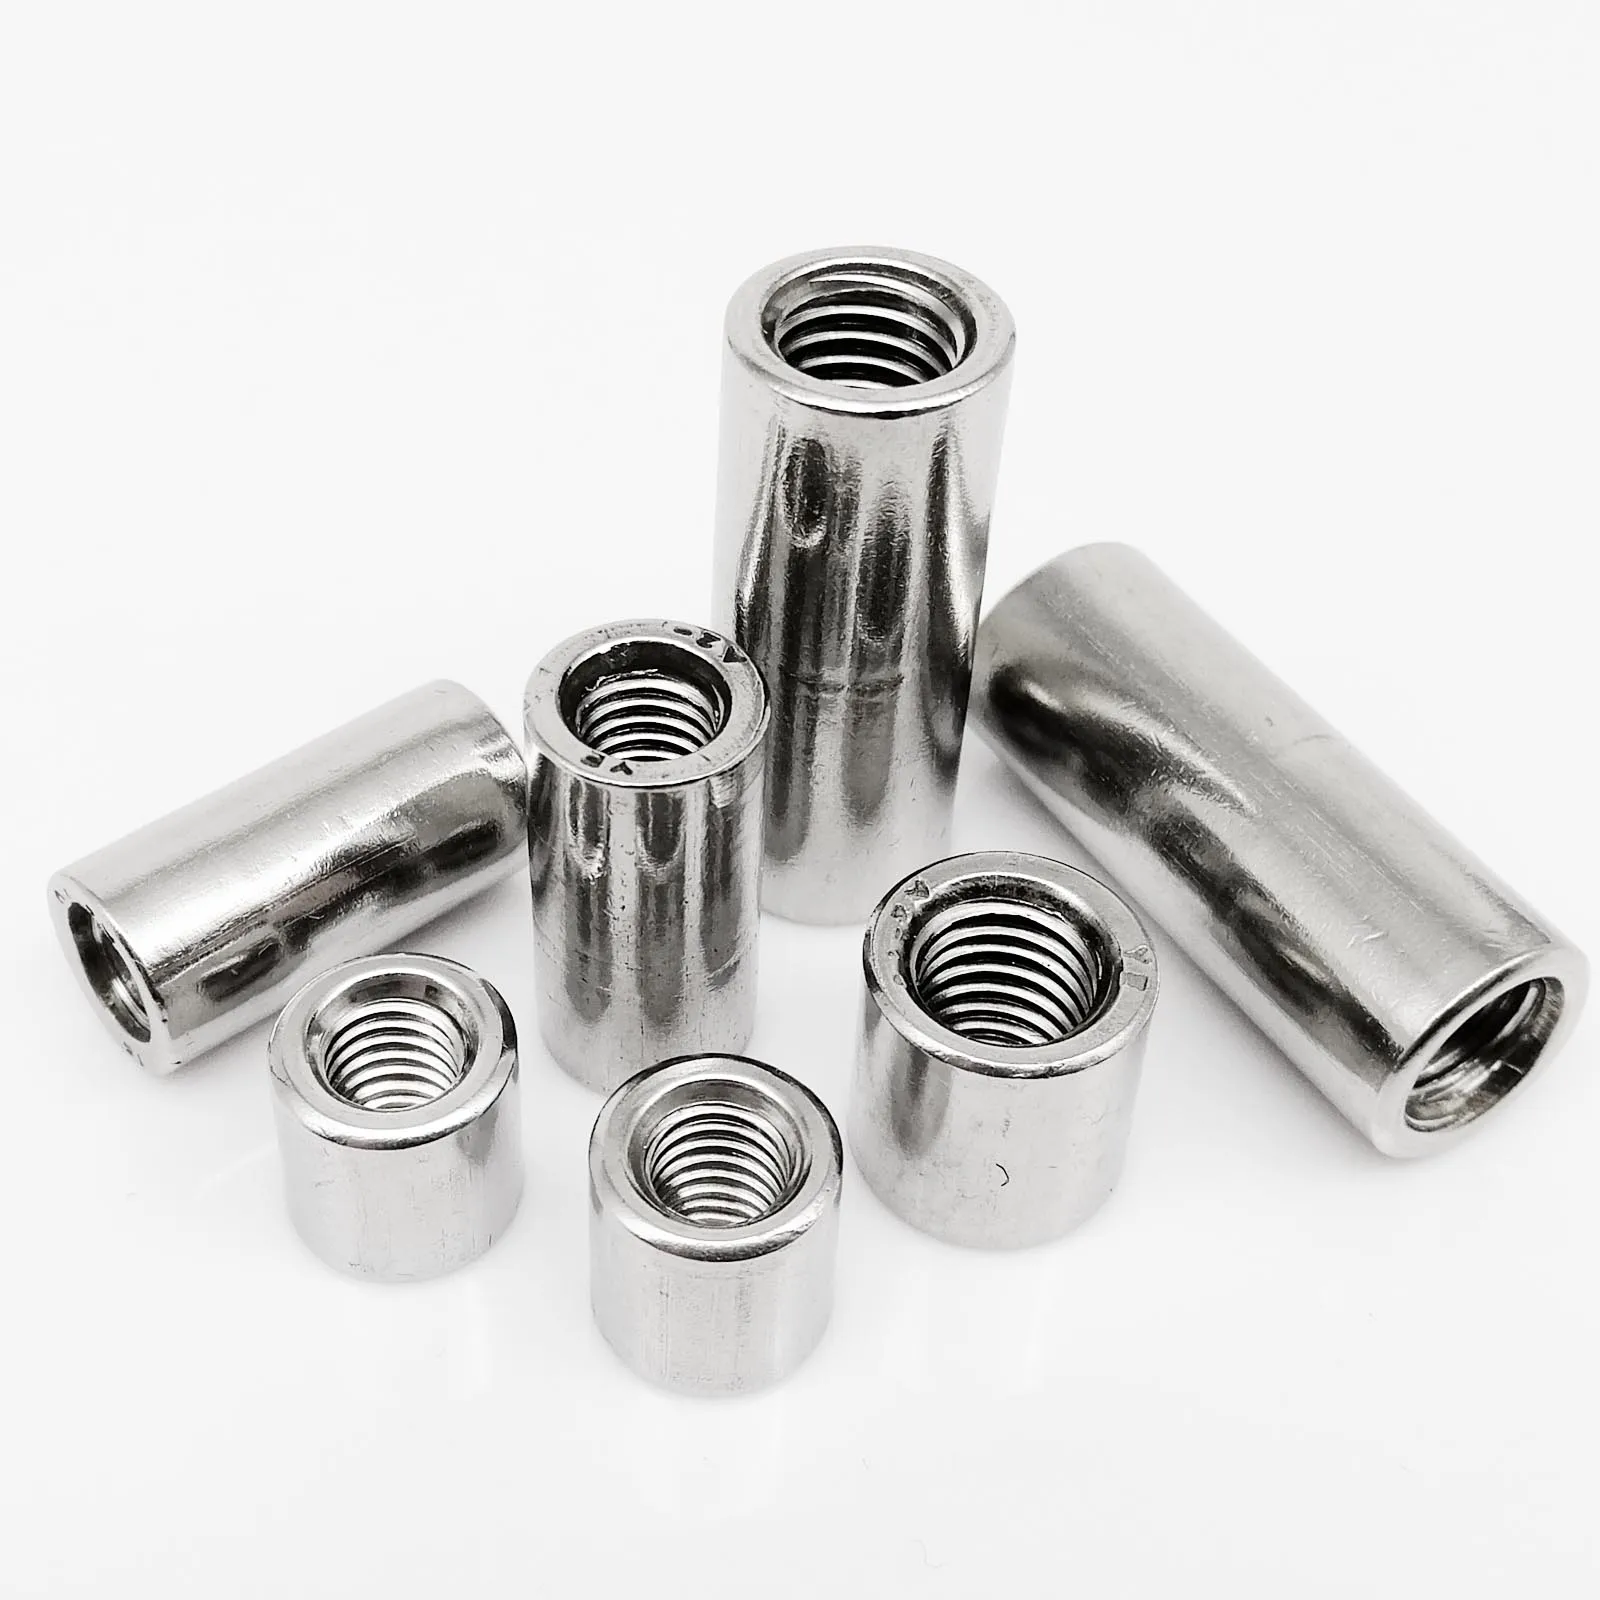 25PCS M4 M5 M6 M8 M10 Stainless Steel Lengthened Nuts Thicker Cylinder Union Nut 